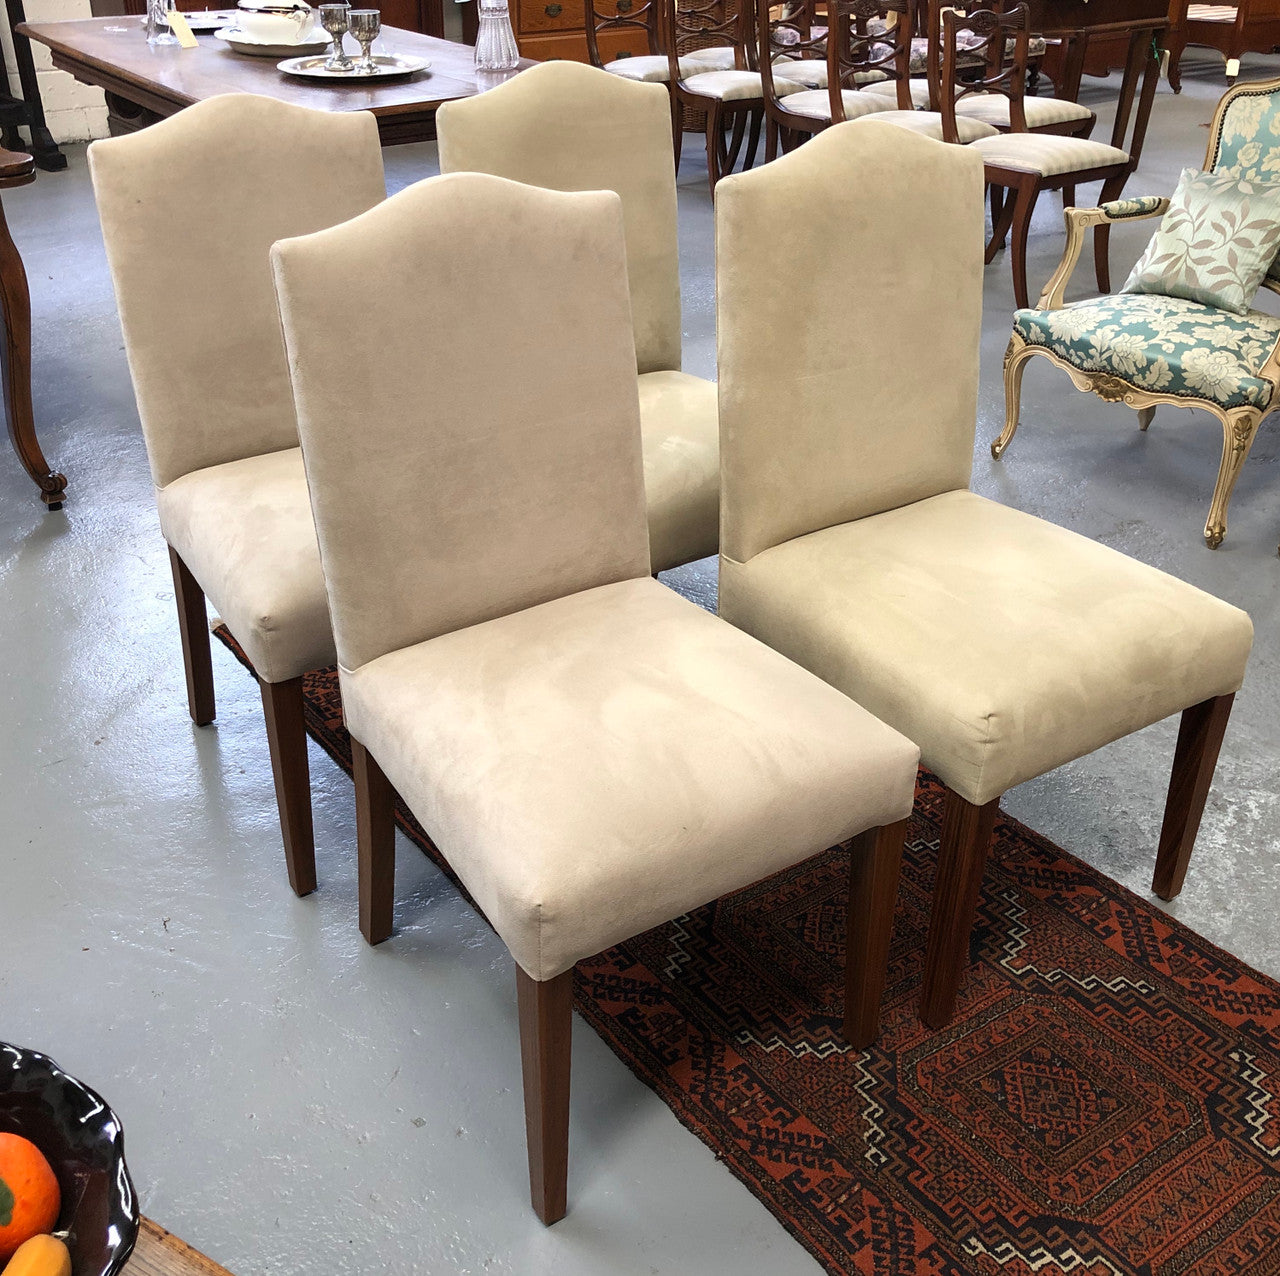 Beautiful set of four upholstered taupe/ light fawn dining chairs which are very comfortable to sit in. They are in good original conditon.